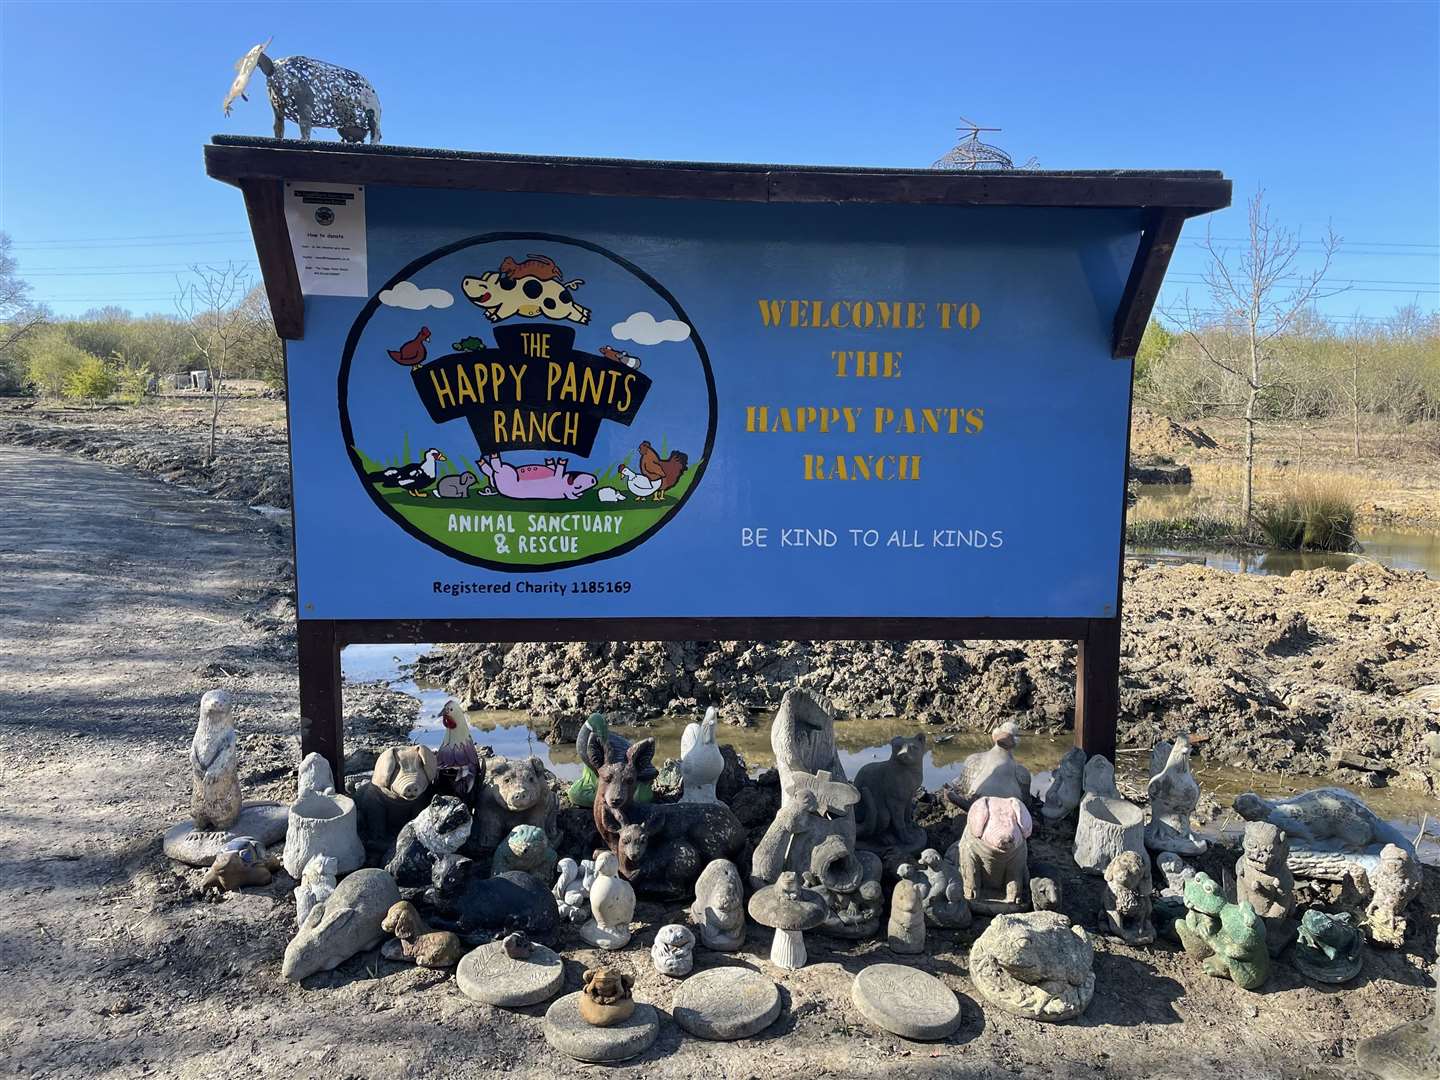 The entrance to The Happy Pants Ranch animal sanctuary